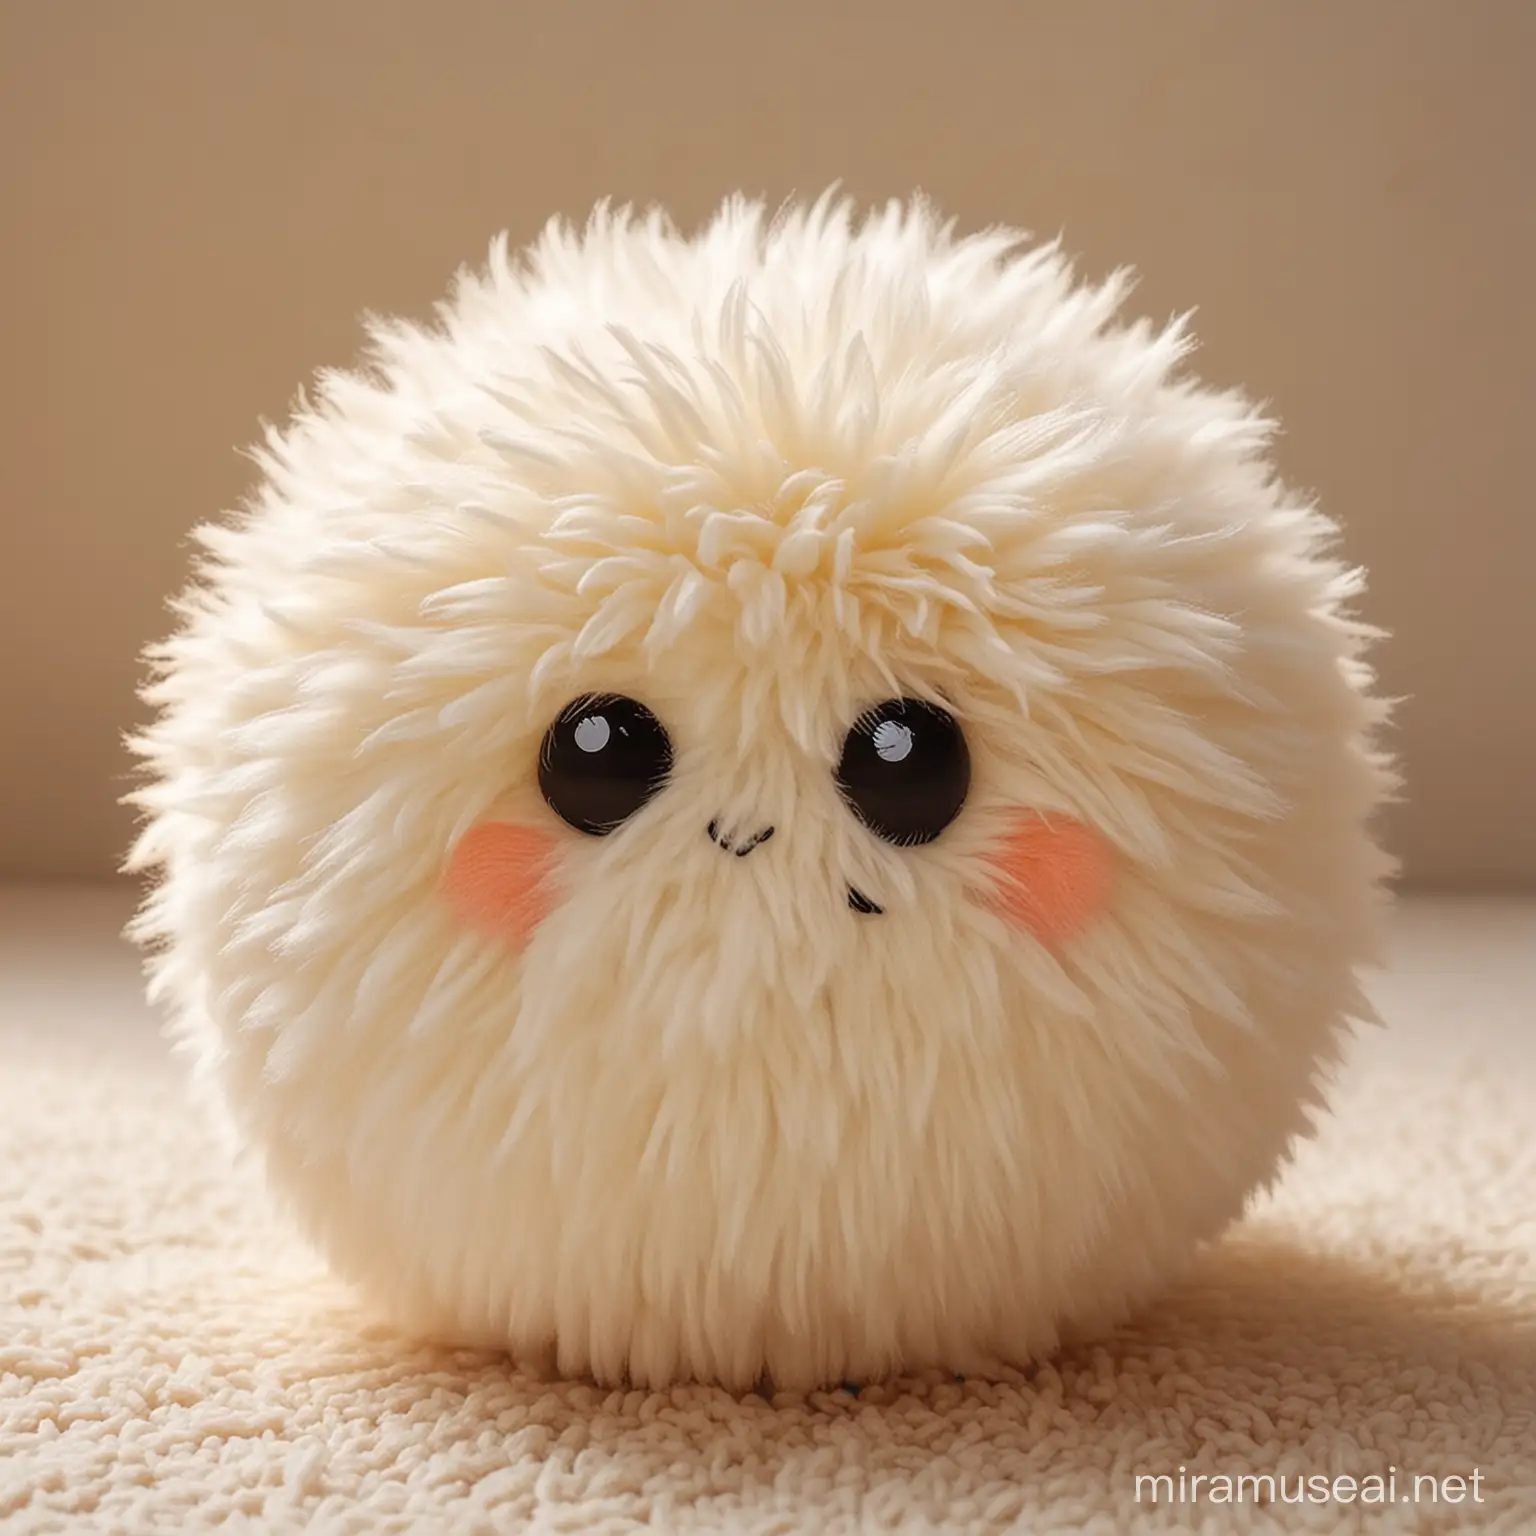 warm fuzzy ball that feels like happyness and is super fun and kind of looks like an aura
